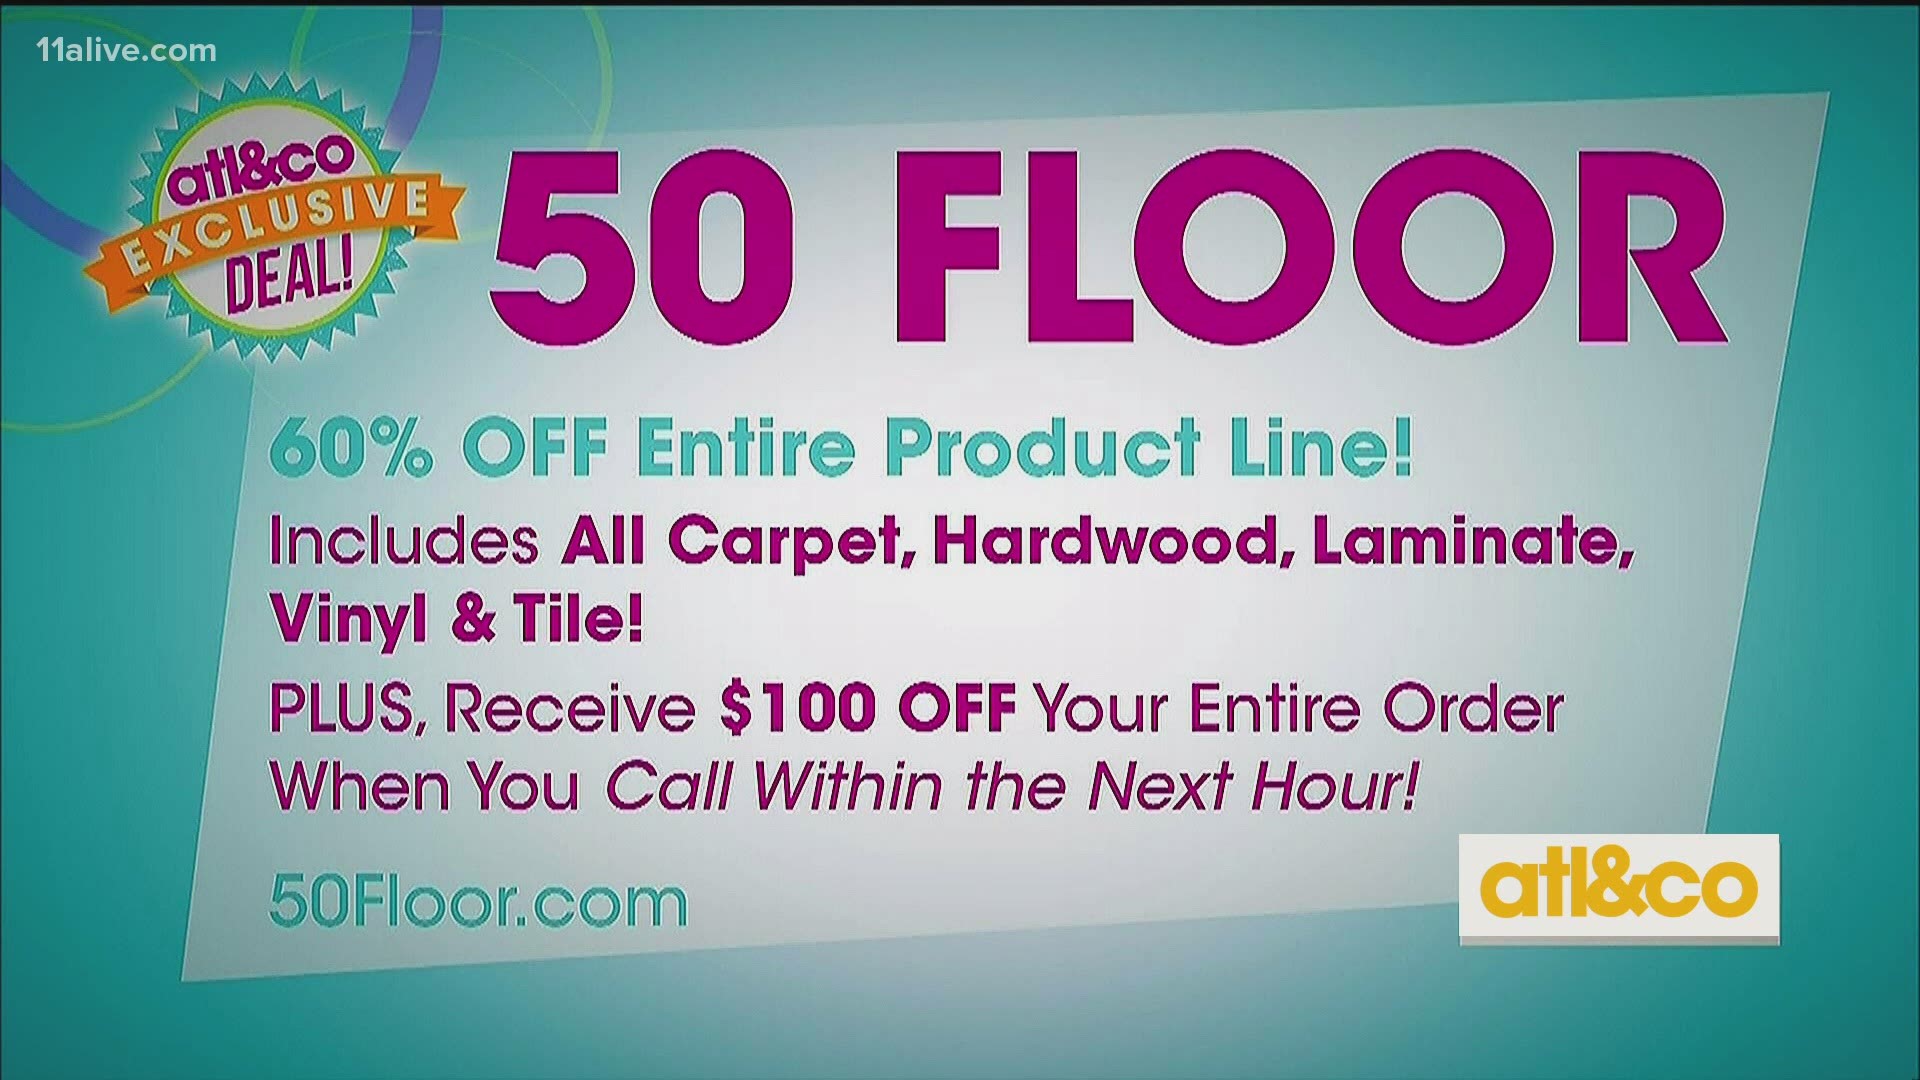 Take advantage of 60% off 50 Floor's entire product line and update your home with ease.